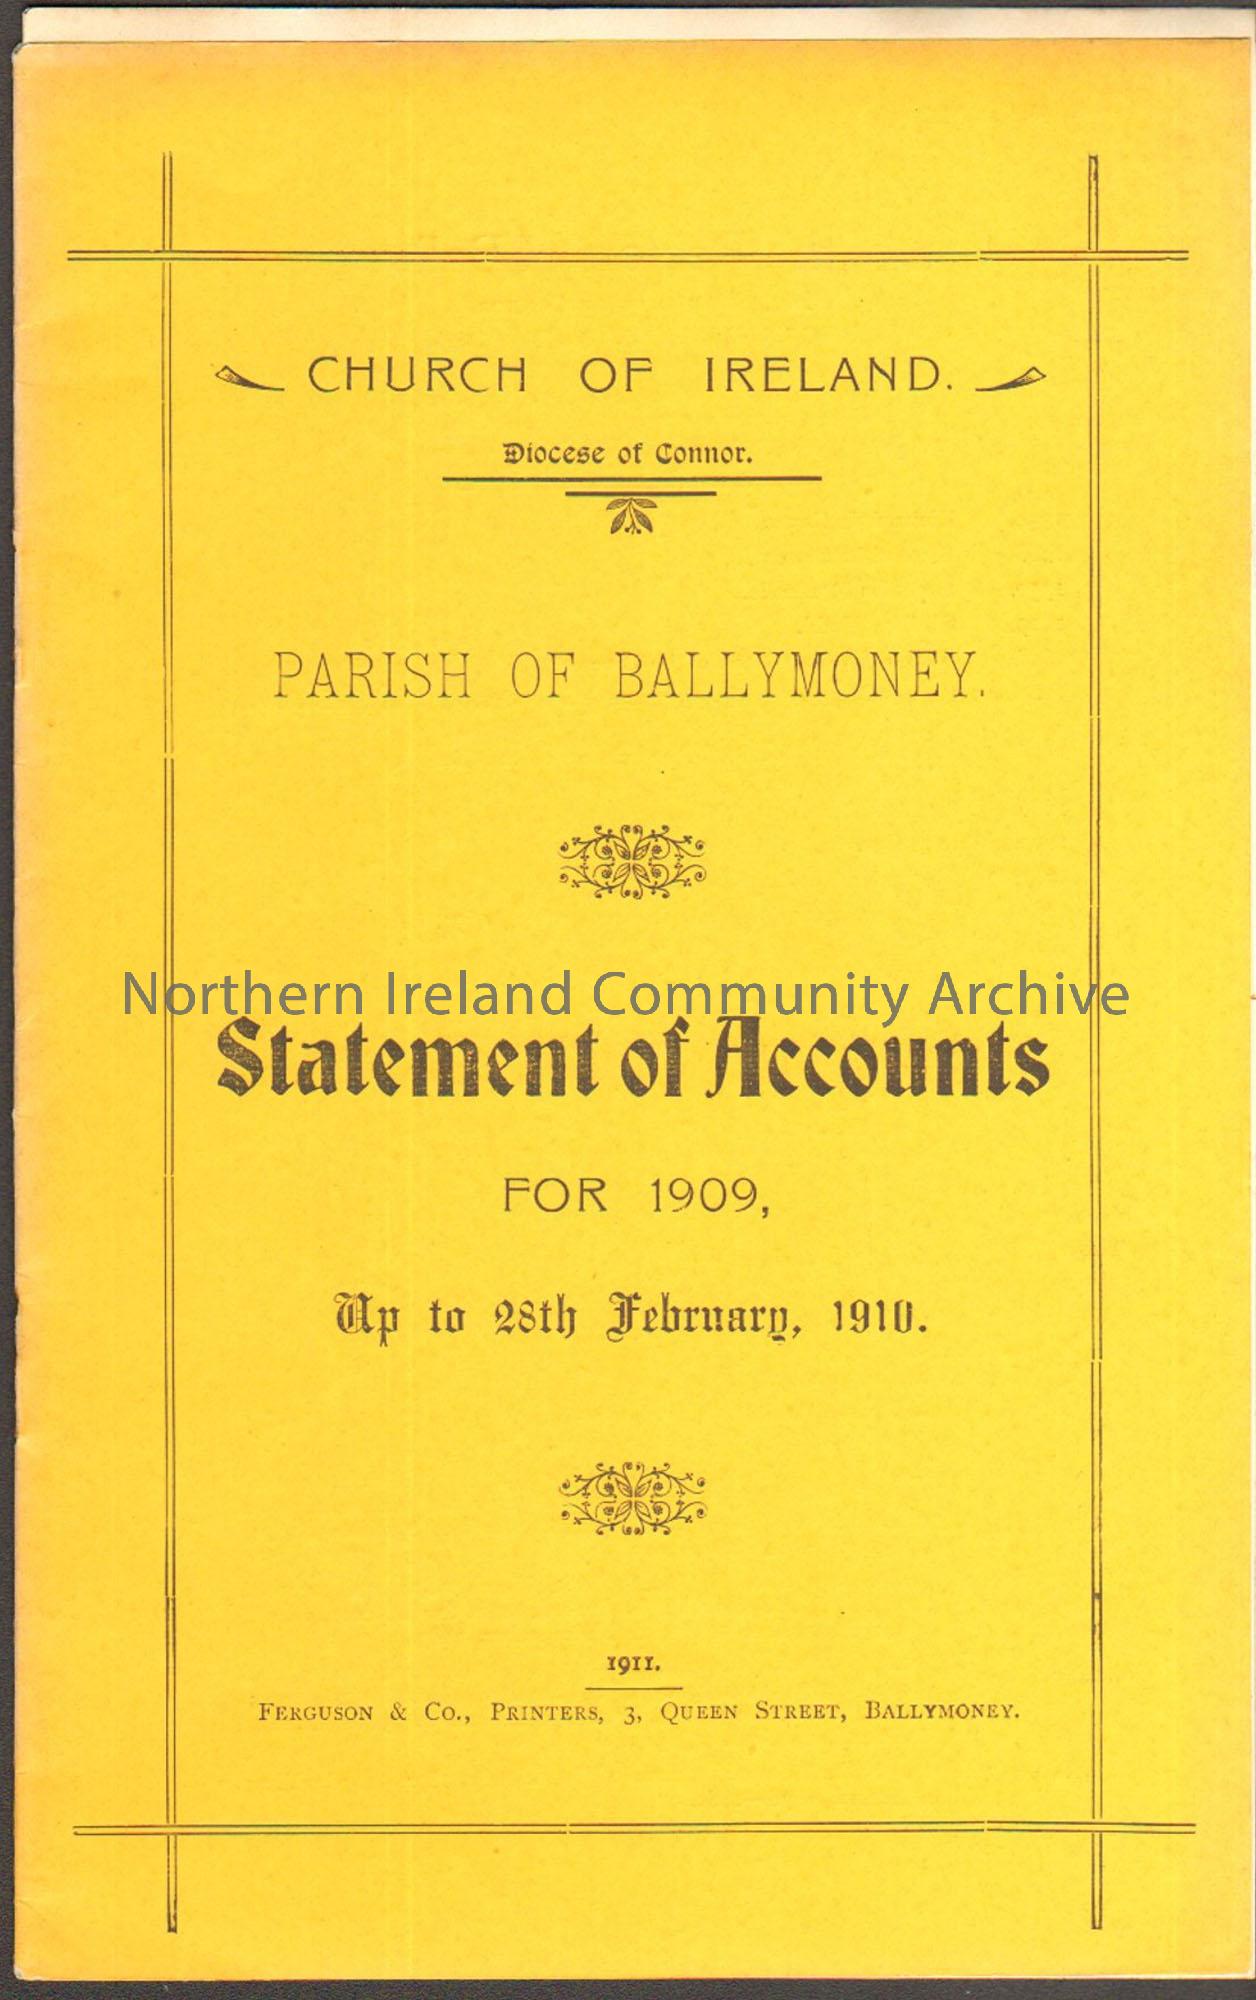 Orange booklet, Church of Ireland, Parish of Ballymoney, Statement of Accounts for 1909 up to February 28th, 1910